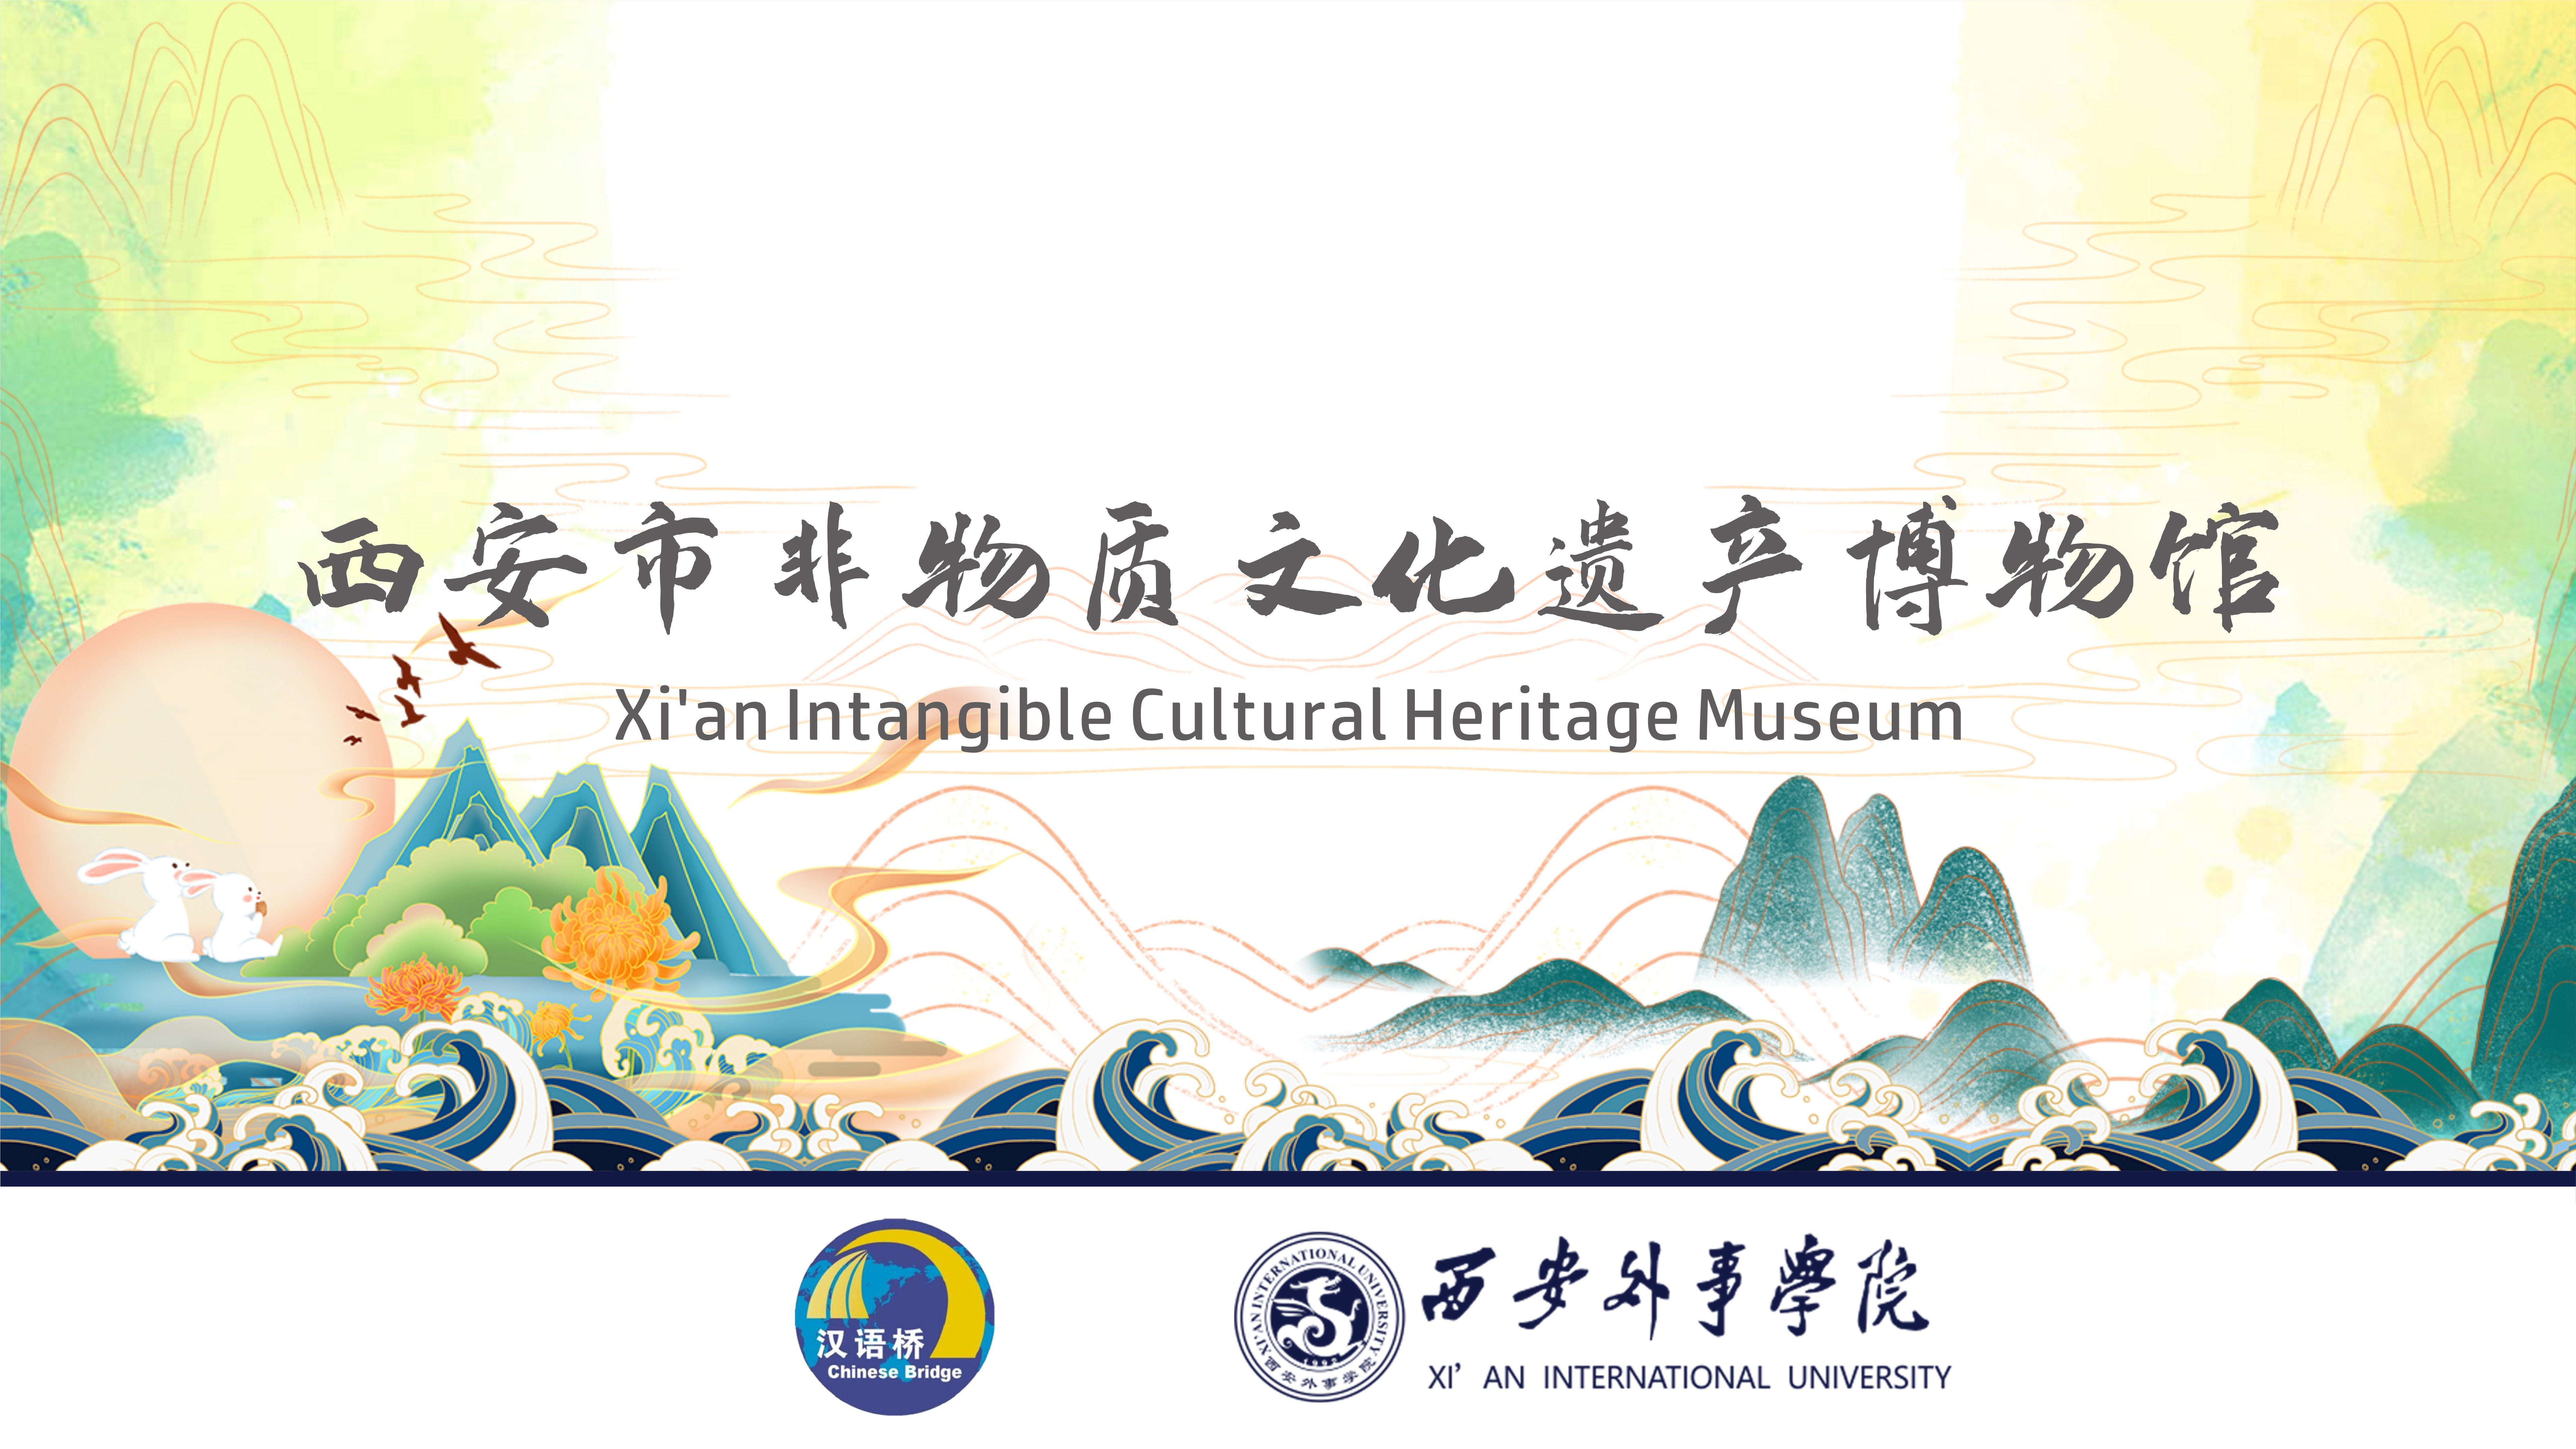 Xi’an Intangible Cultural Heritage Museum